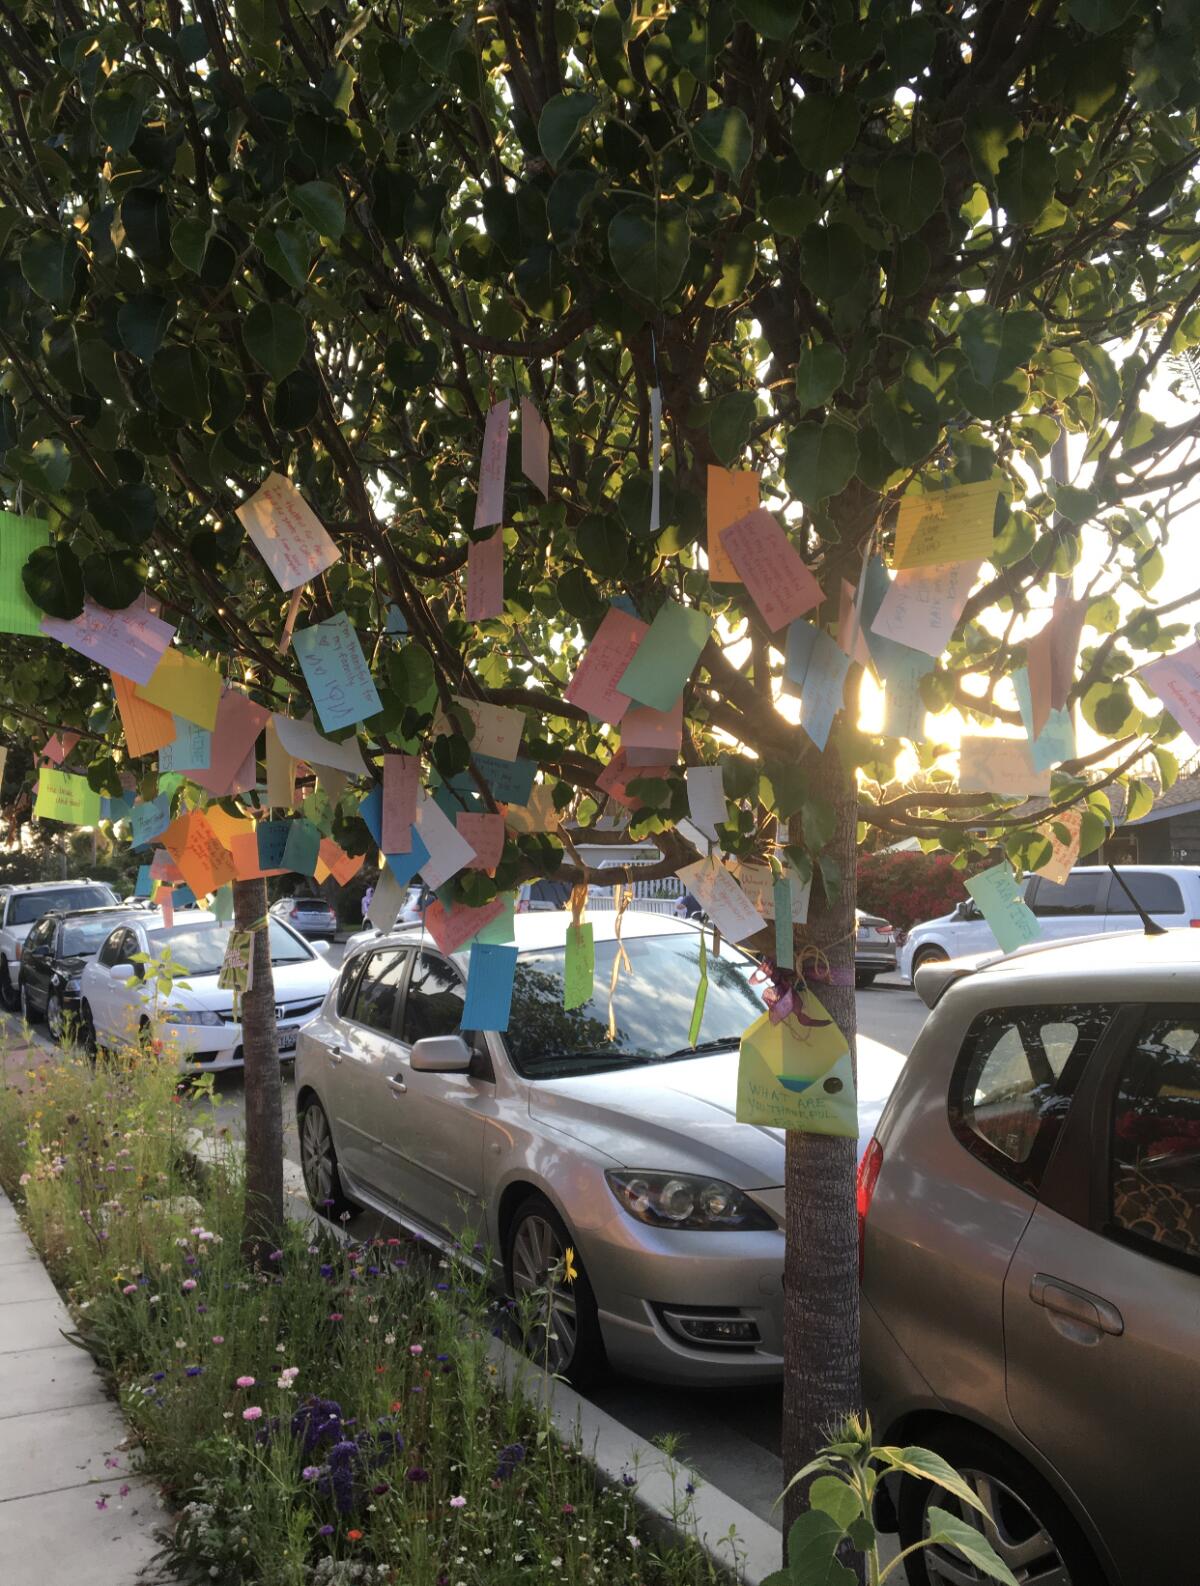 Over the past year and a half, Molly Bowman-Styles has hung cards on trees outside her La Jolla home, asking for messages.